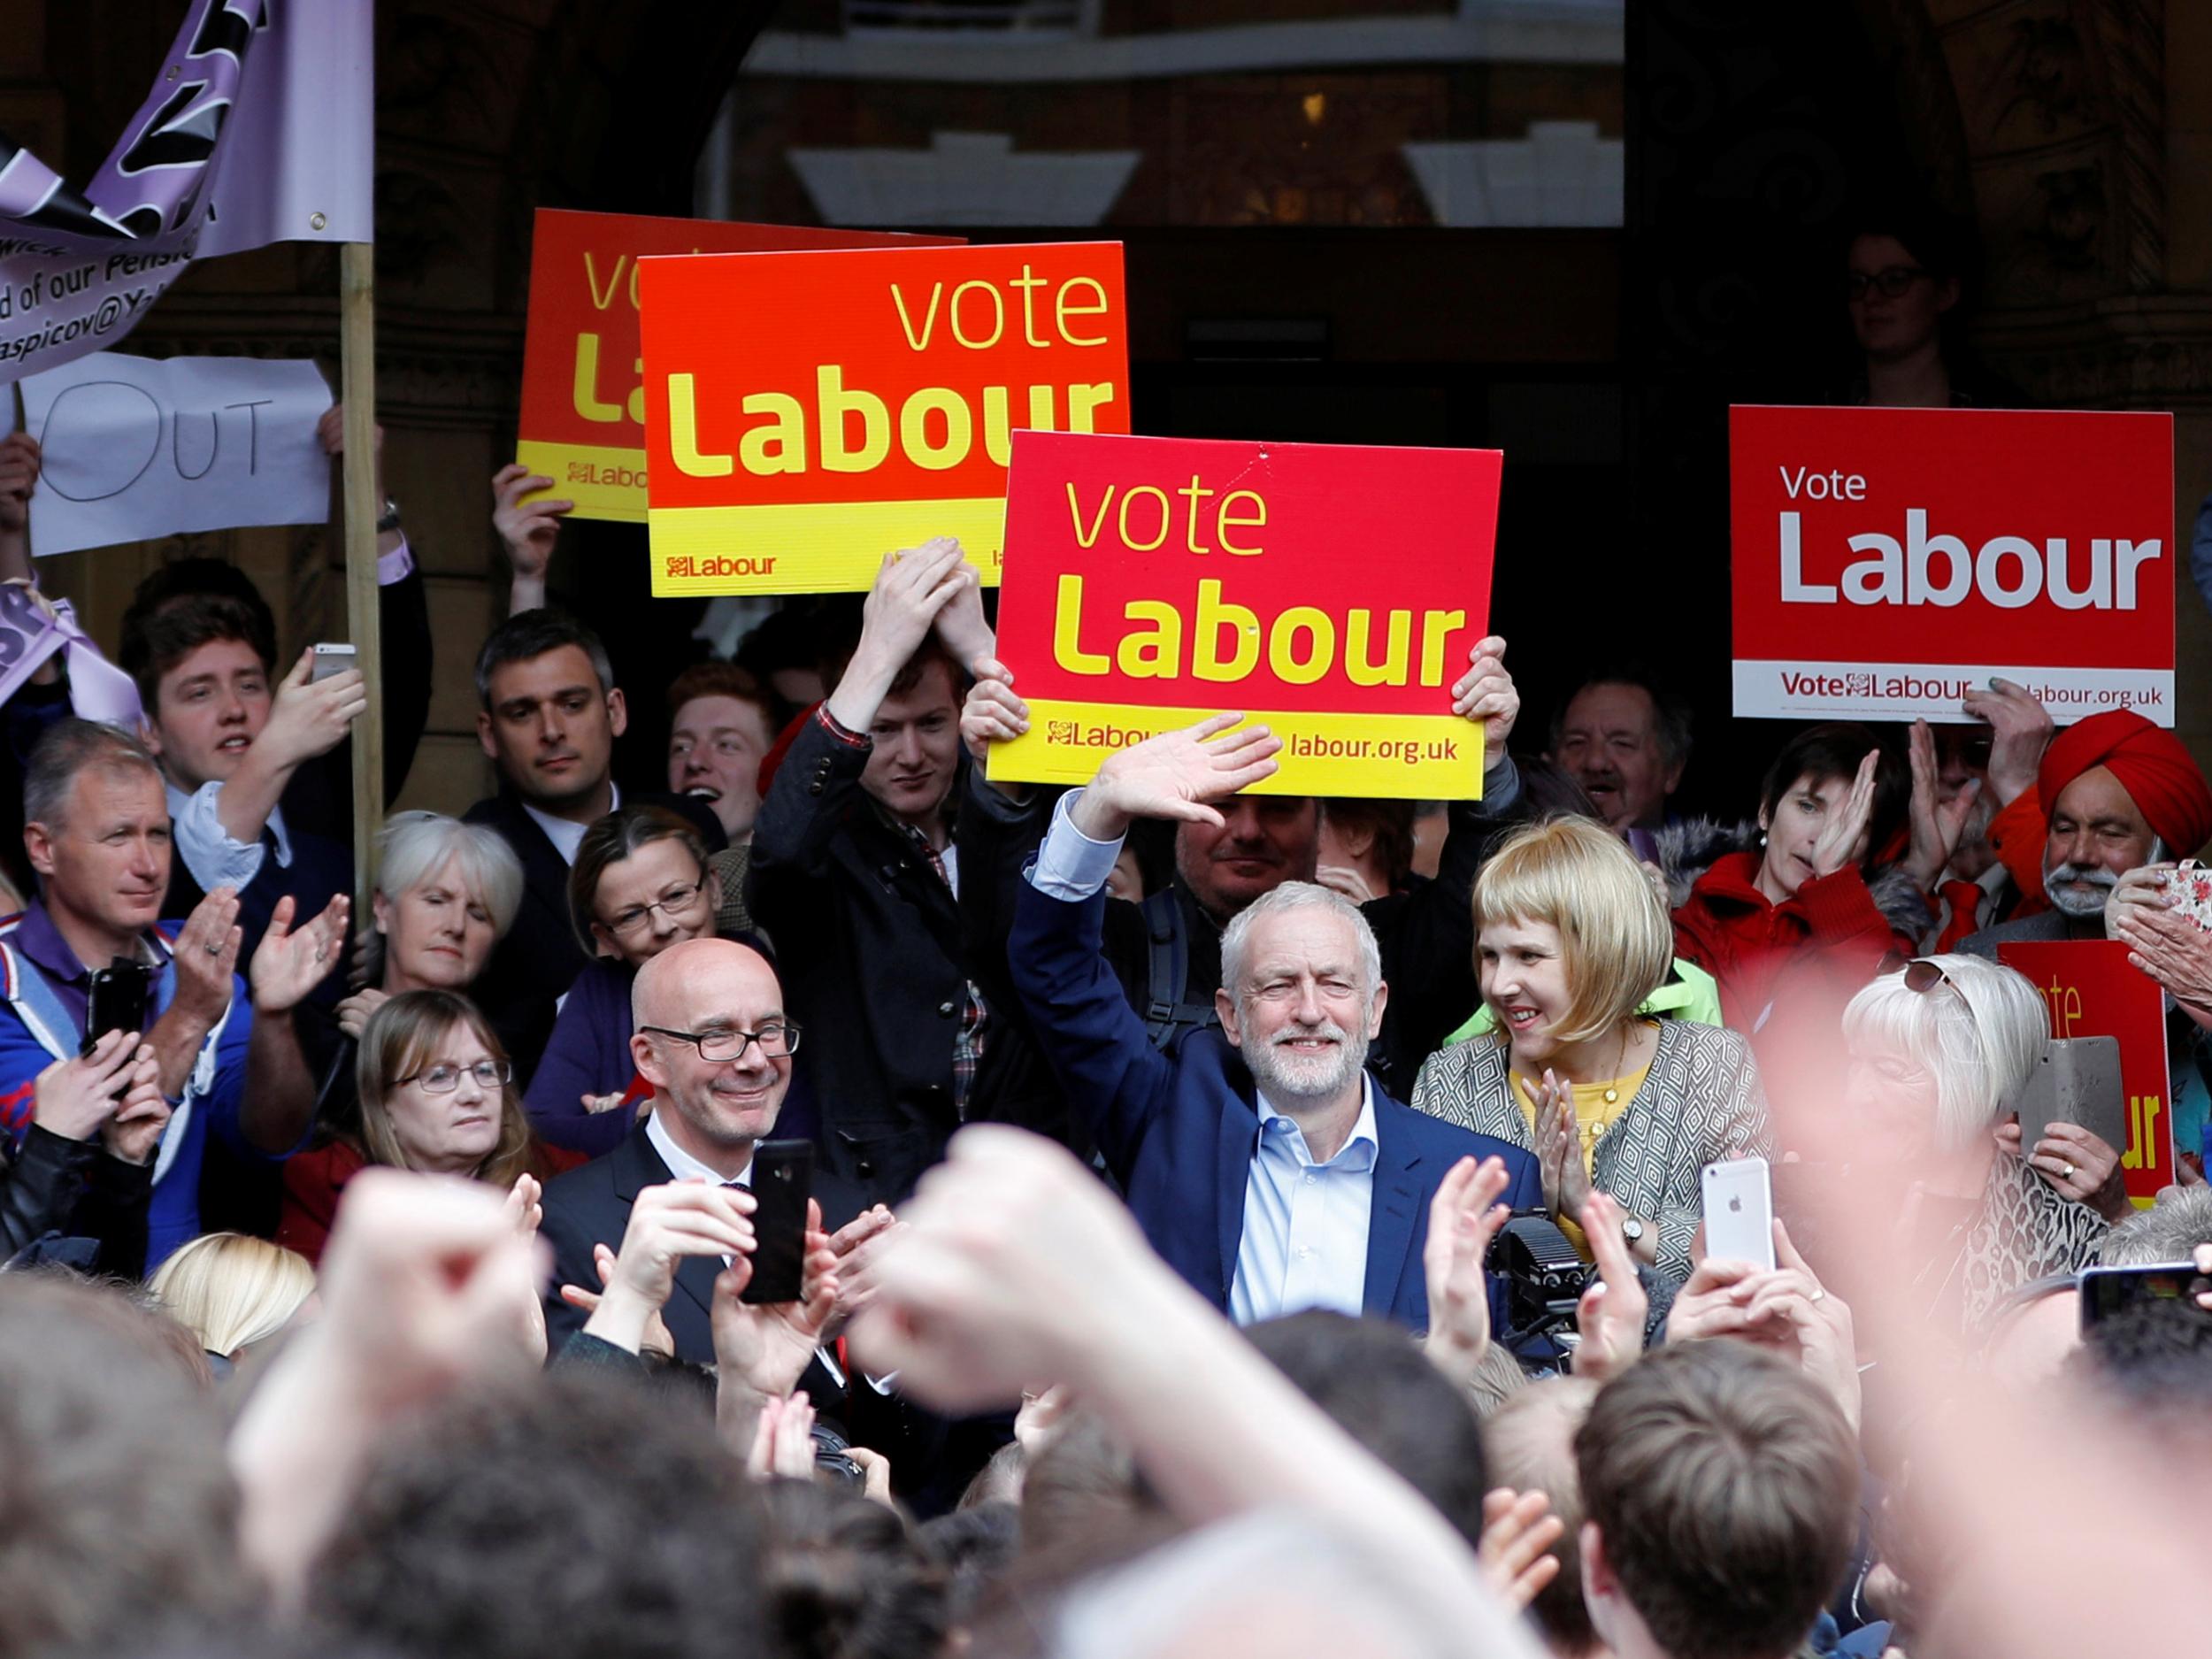 Jeremy Corbyn has suggested he will remain as Labour leader even if he fails to gain power in the General Election